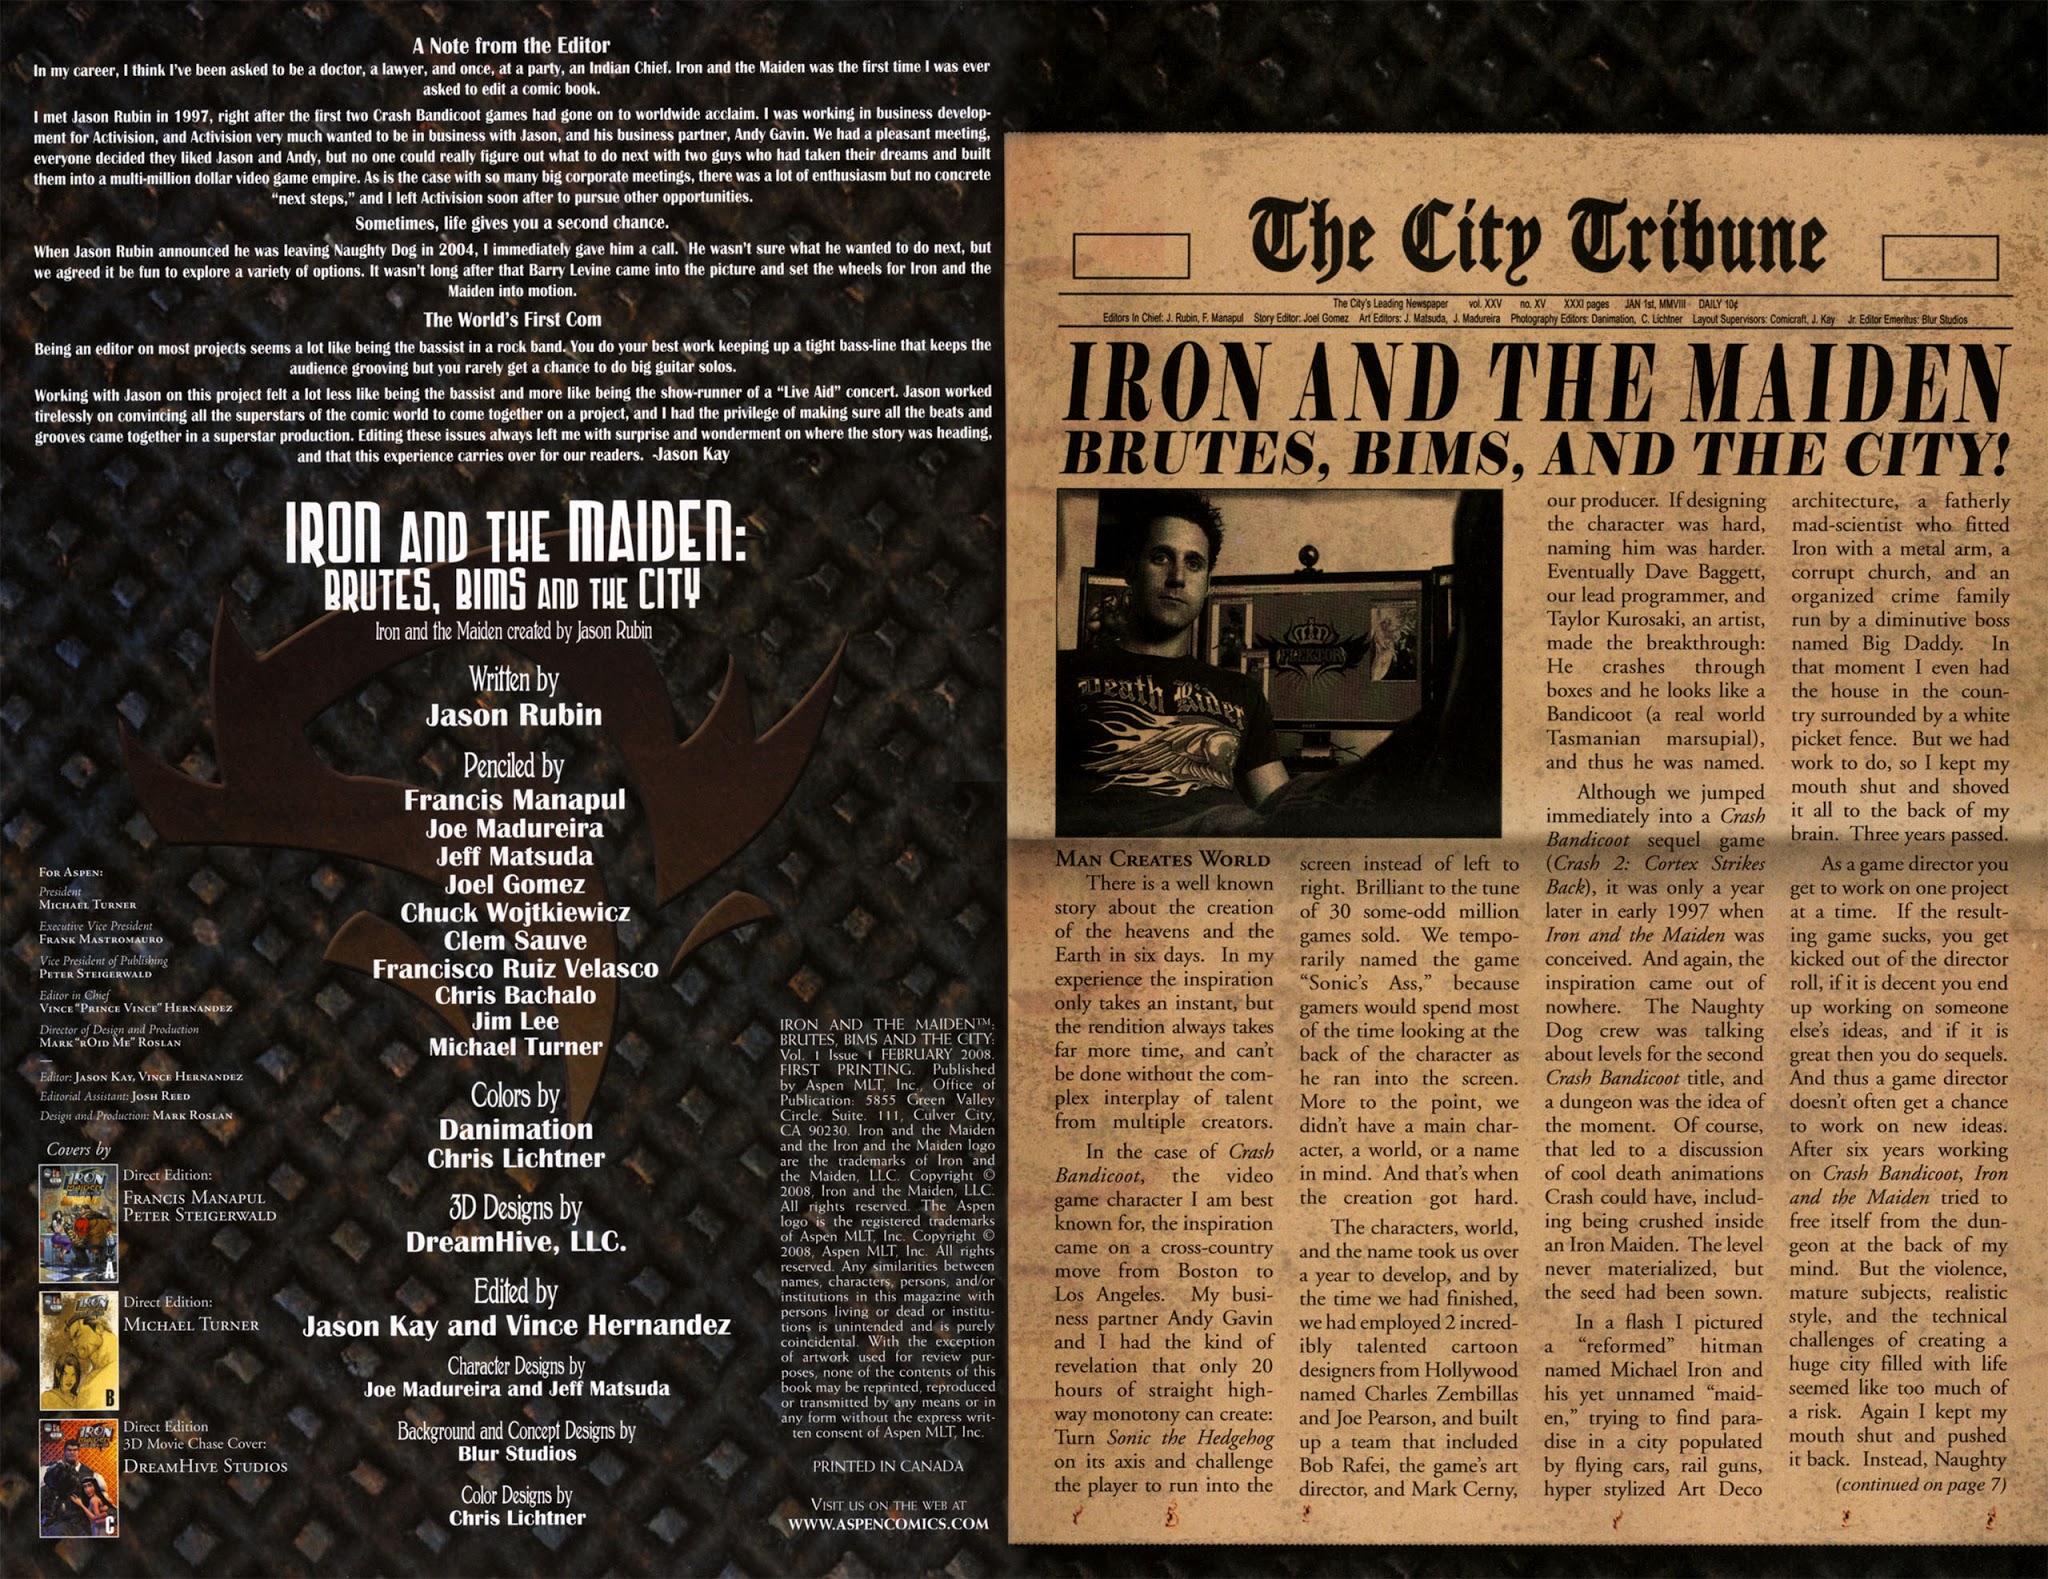 Read online Iron and the Maiden: Brutes, Bims and the City comic -  Issue # Full - 2